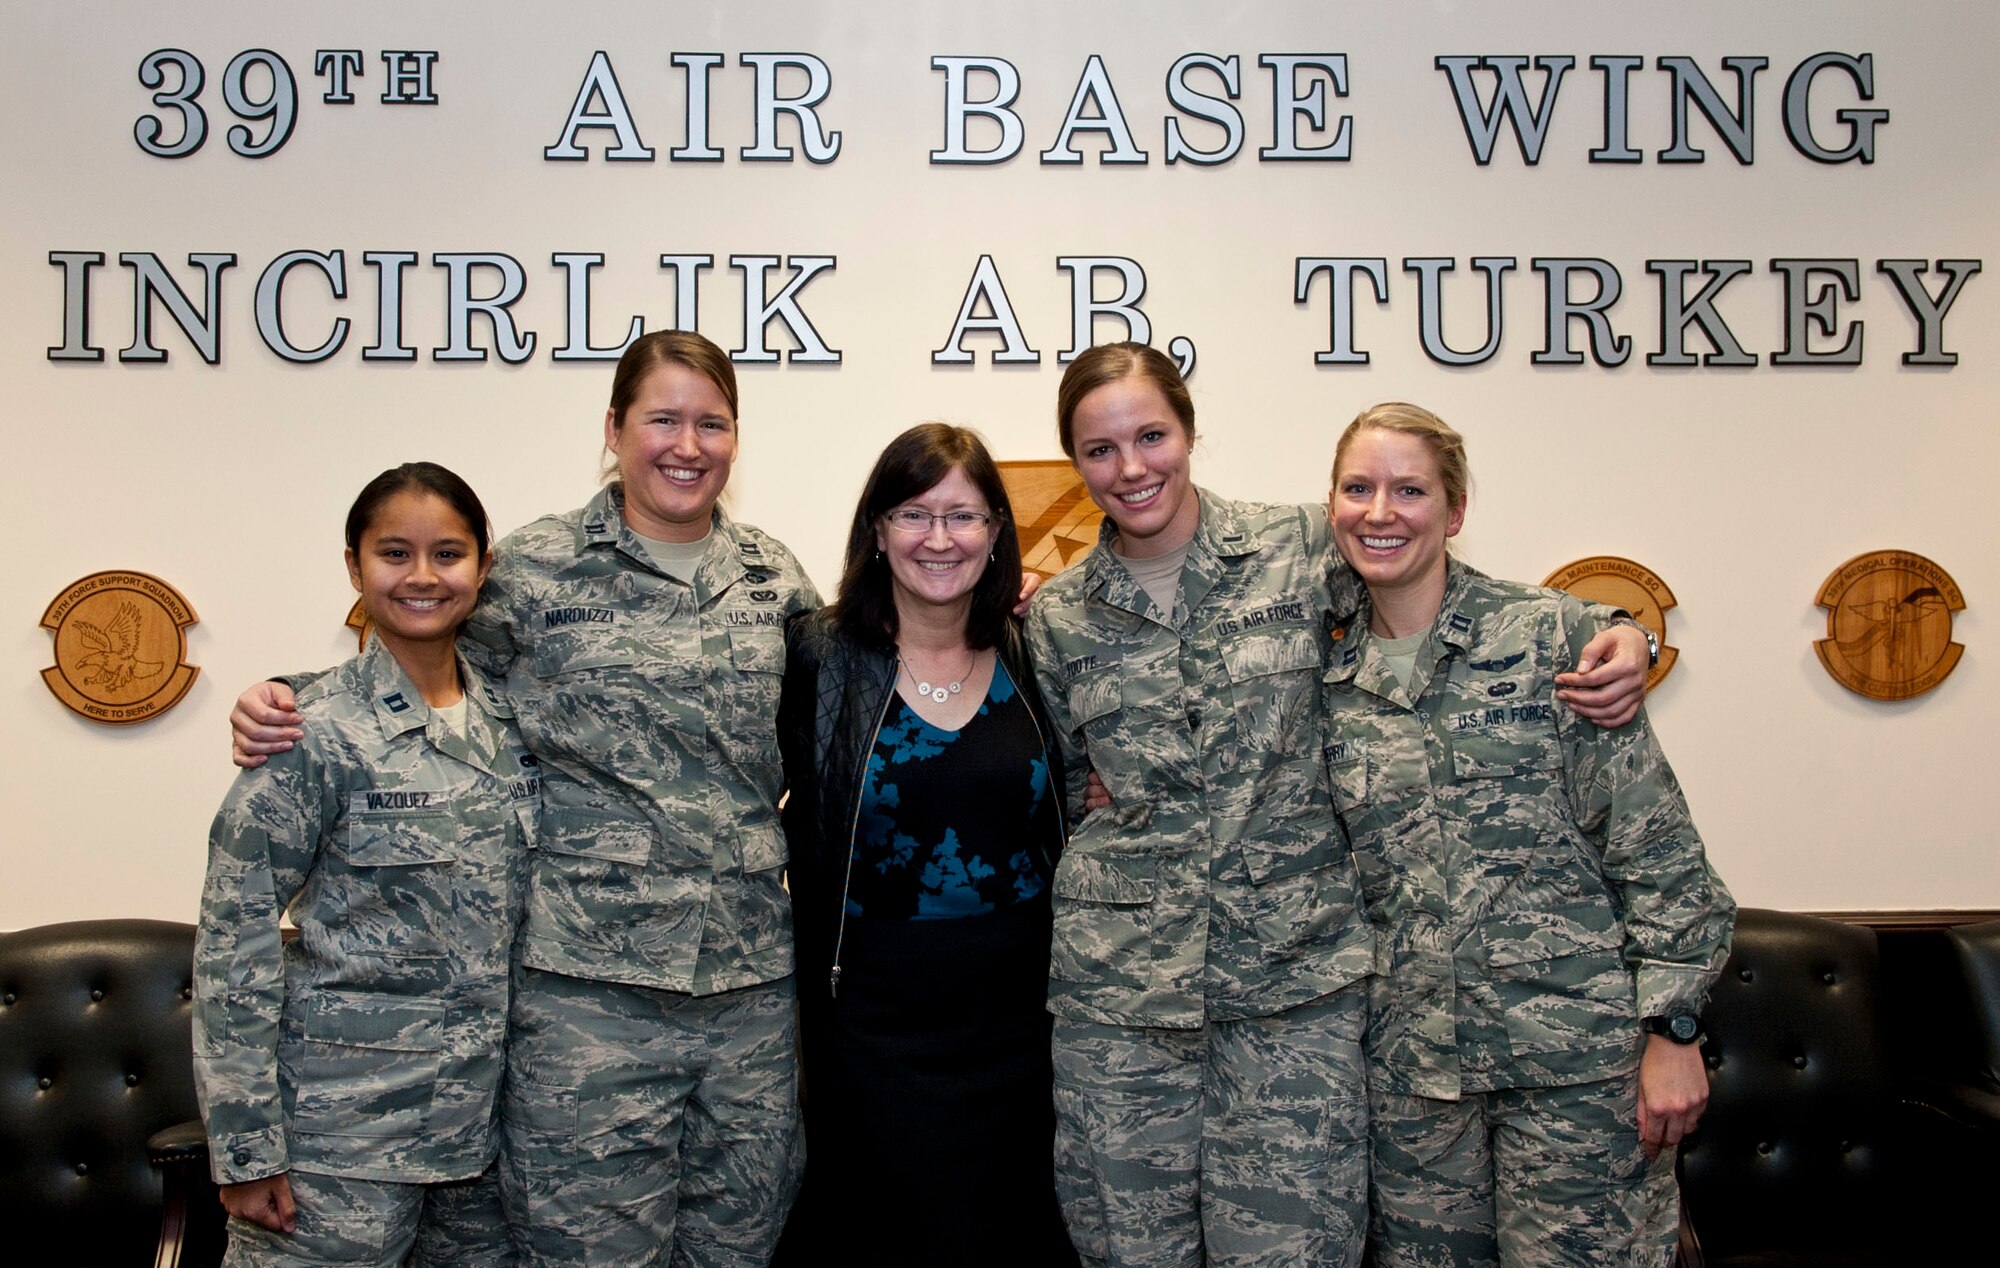 Ricki Selva, U.S. Air Force Academy graduate, visits with fellow female academy alumni Nov. 25, 2015 at Incirlik Air Base, Turkey. Mrs. Selva, a graduate of the first female inclusive class of the Air Force Academy, instructed the Airmen to always strive to better the service. Mrs. Selva has played a key role in raising awareness about sexual harassment and sexual assault across the Air Force and at the academy. (U.S. Air Force photo by Staff Sgt. Jack Sanders/Released)